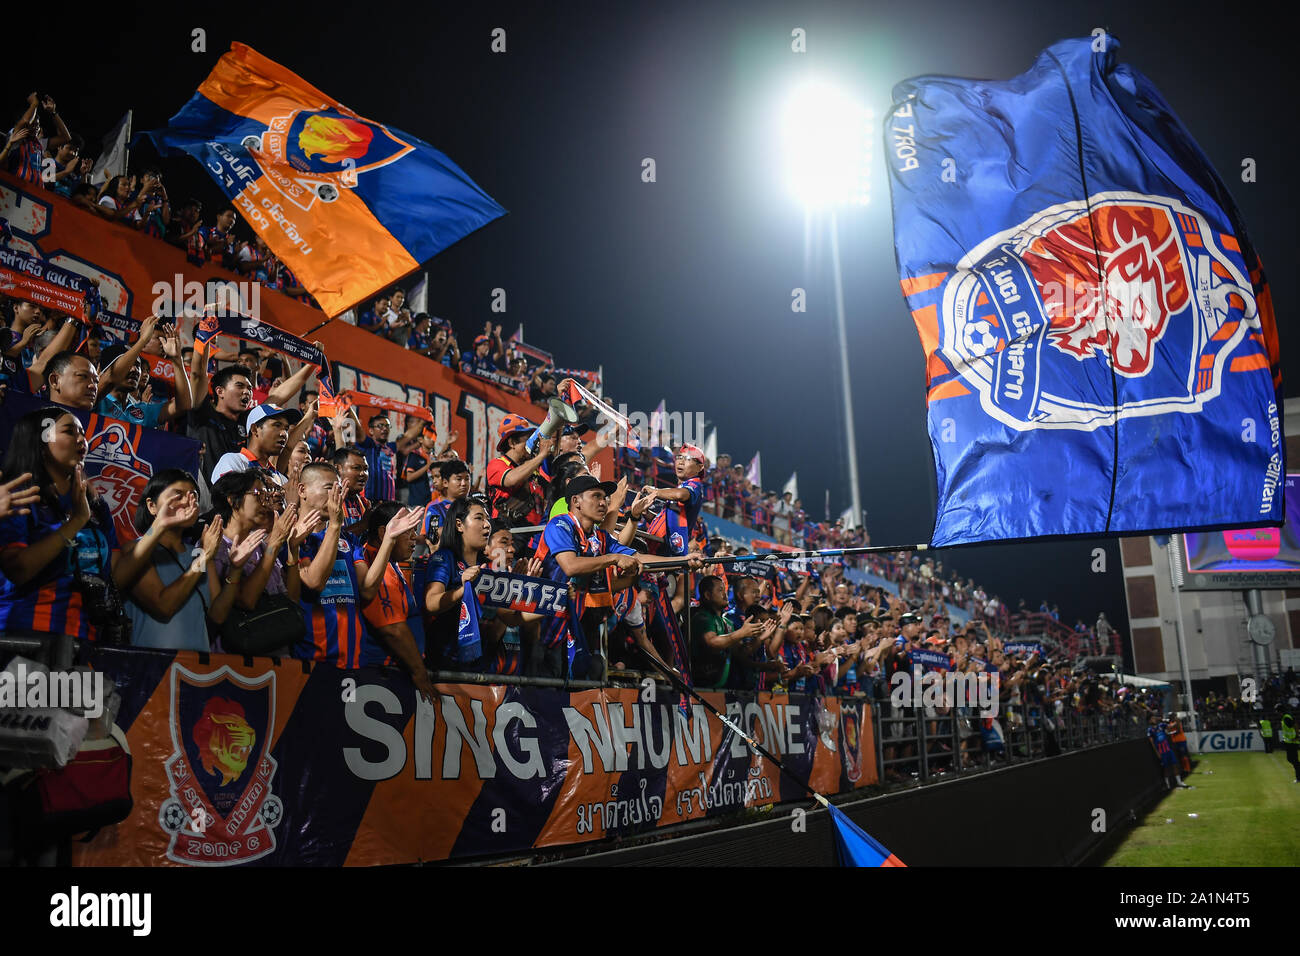 Unidentified Fans Of Port Fc Supporters During Thai League 19 Between Port Fc And Nakhon Ratchasima Fc At Pat Stadium Onseptember 27 19 In Bangkok Thailand Photo By Amphol Thongmueangluang Pacific Press Credit